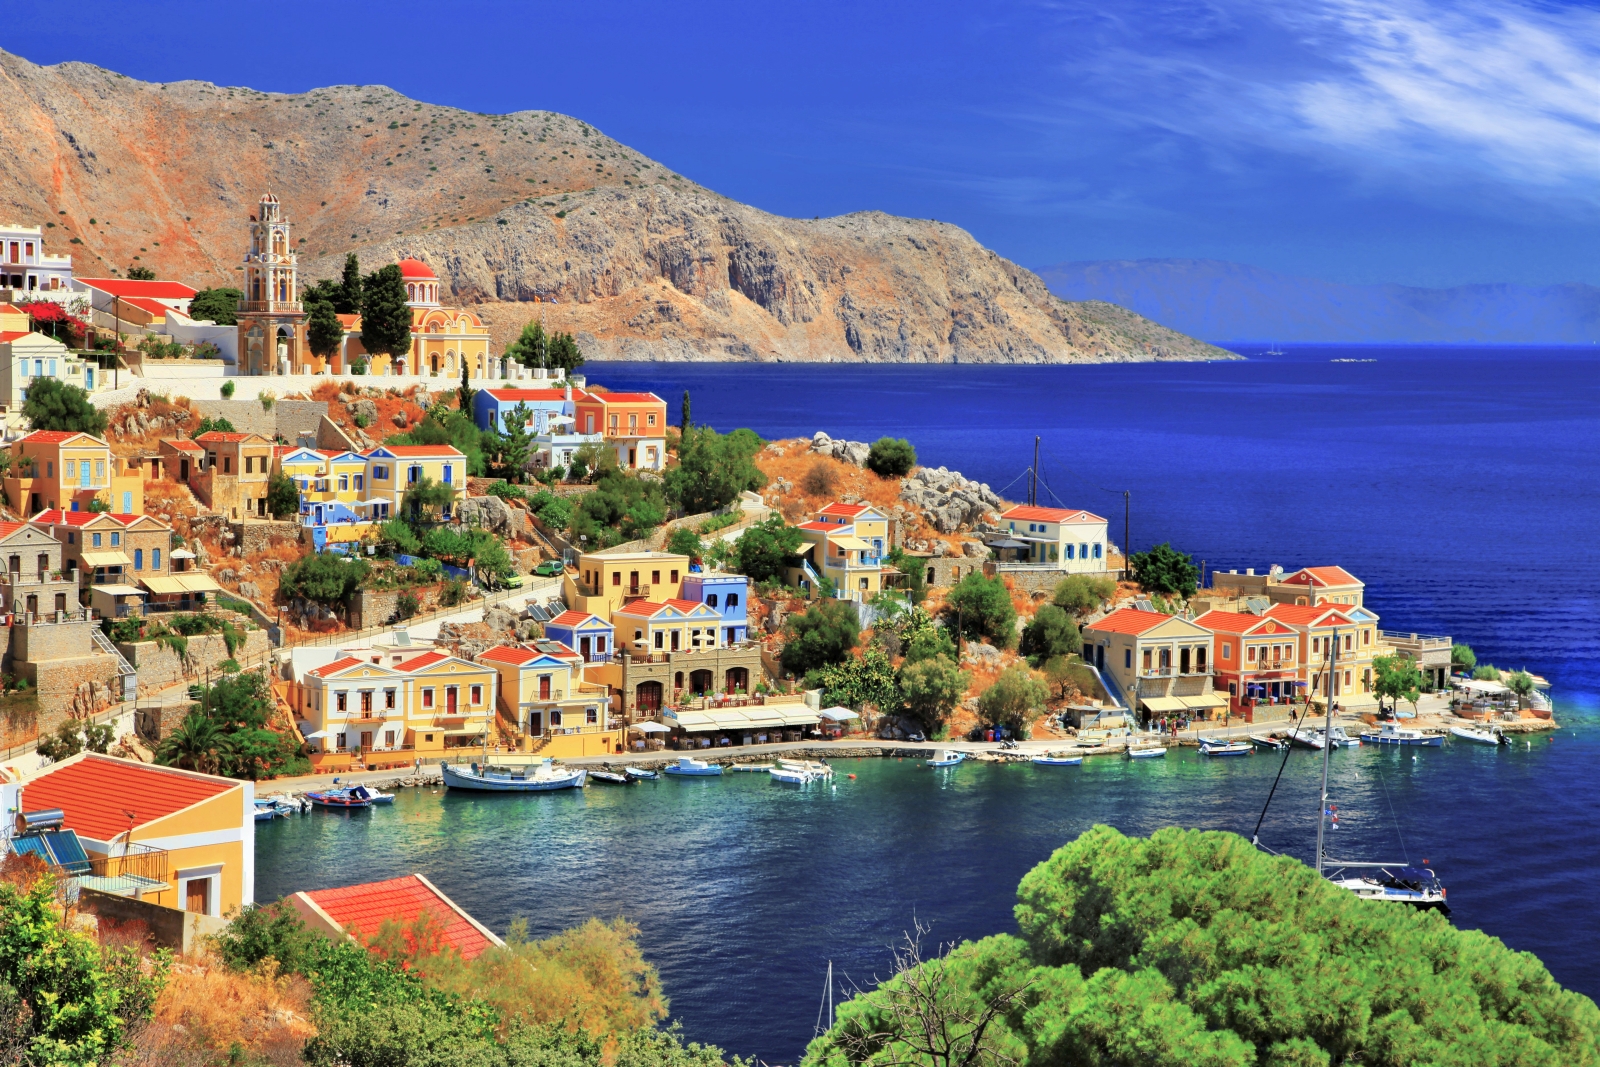 View of Symi Island with a cove and orange and yellow houses